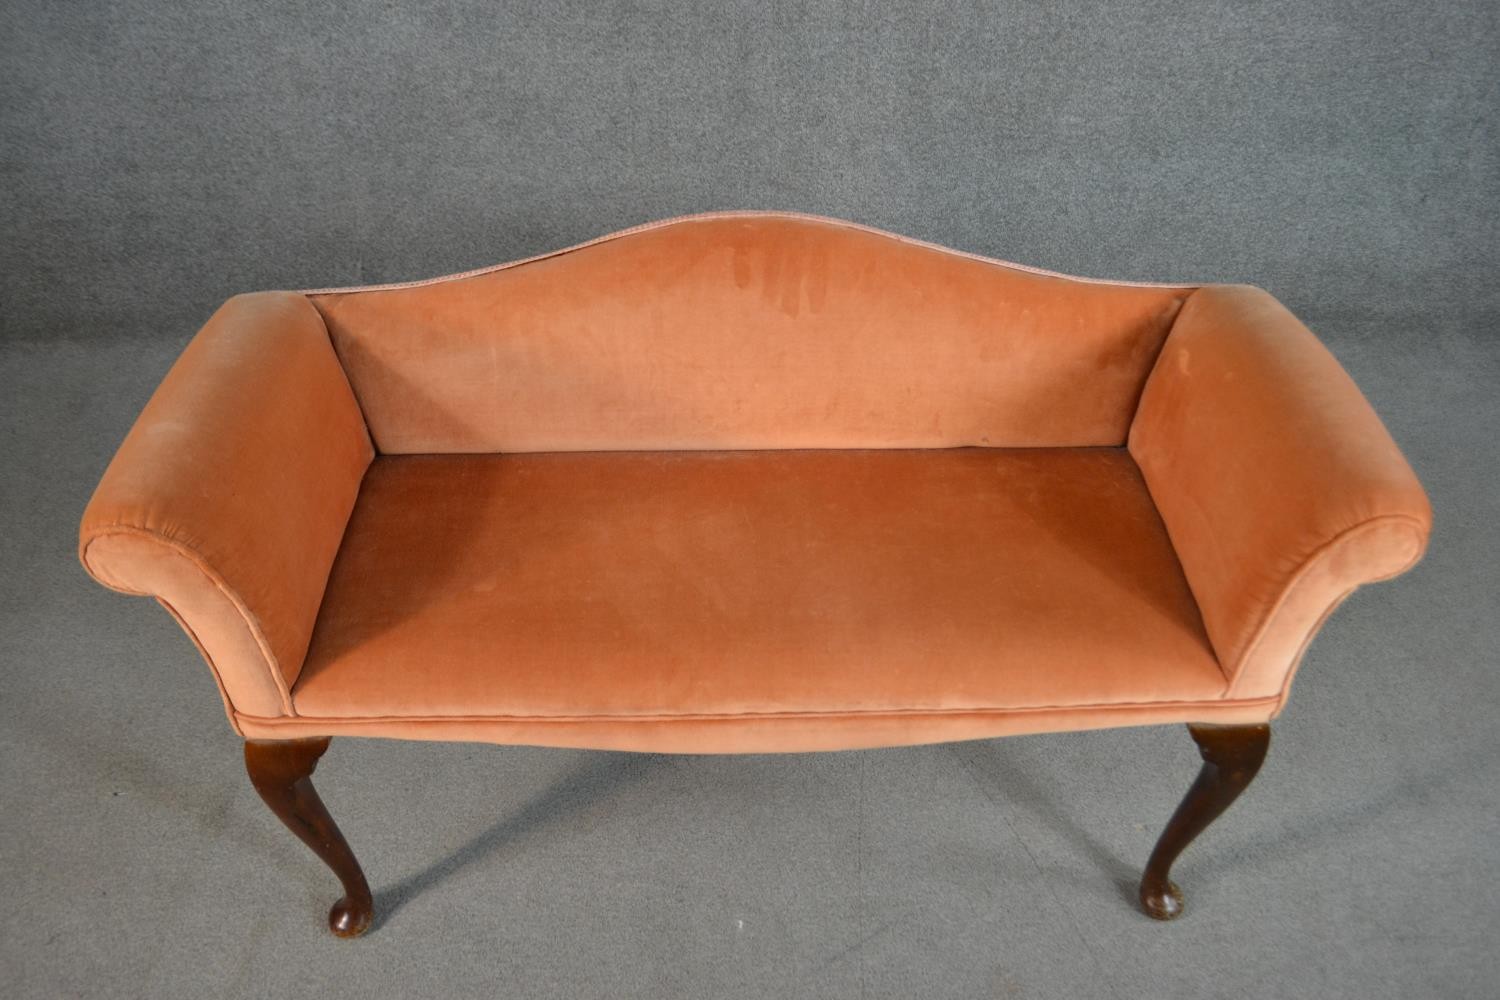 A George III style mahogany hump back window seat, upholstered in salmon coloured velour, on - Image 3 of 5